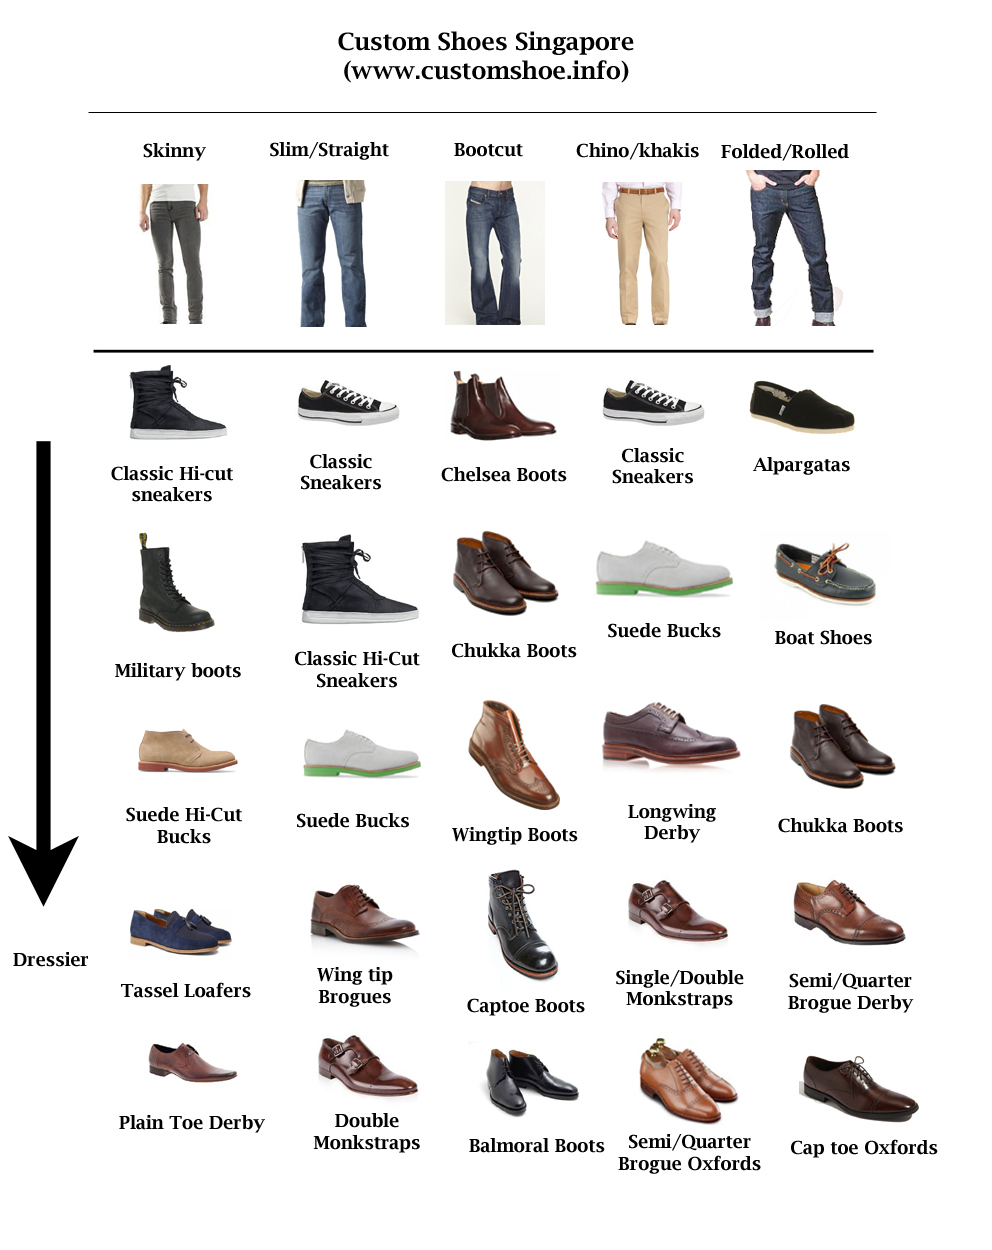 How to dress better with shoes \u0026 jeans 